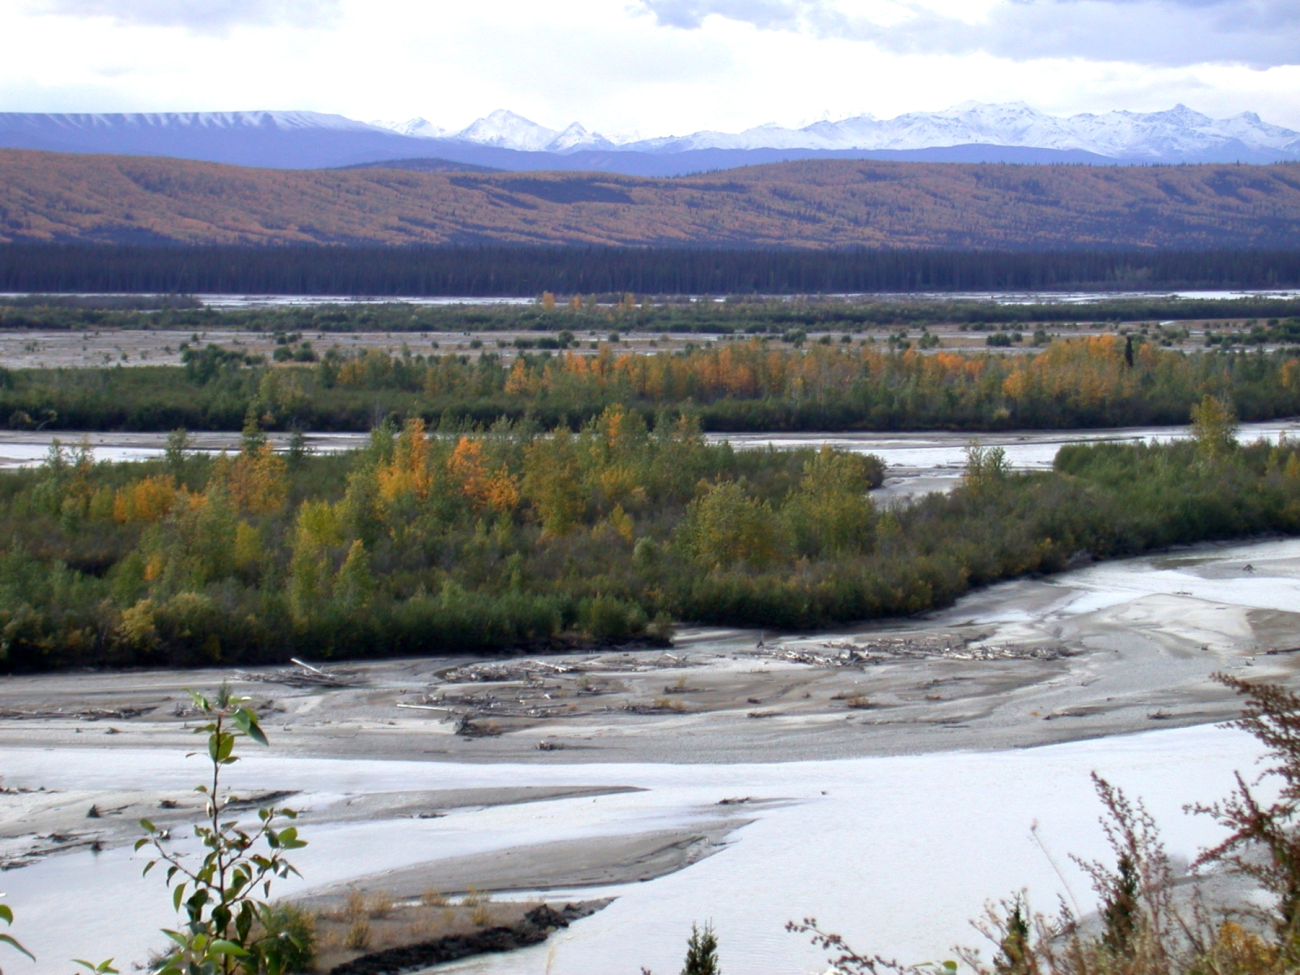 Looking across Susitna River to the high mountains of the AlaskaRange north of Anchorage